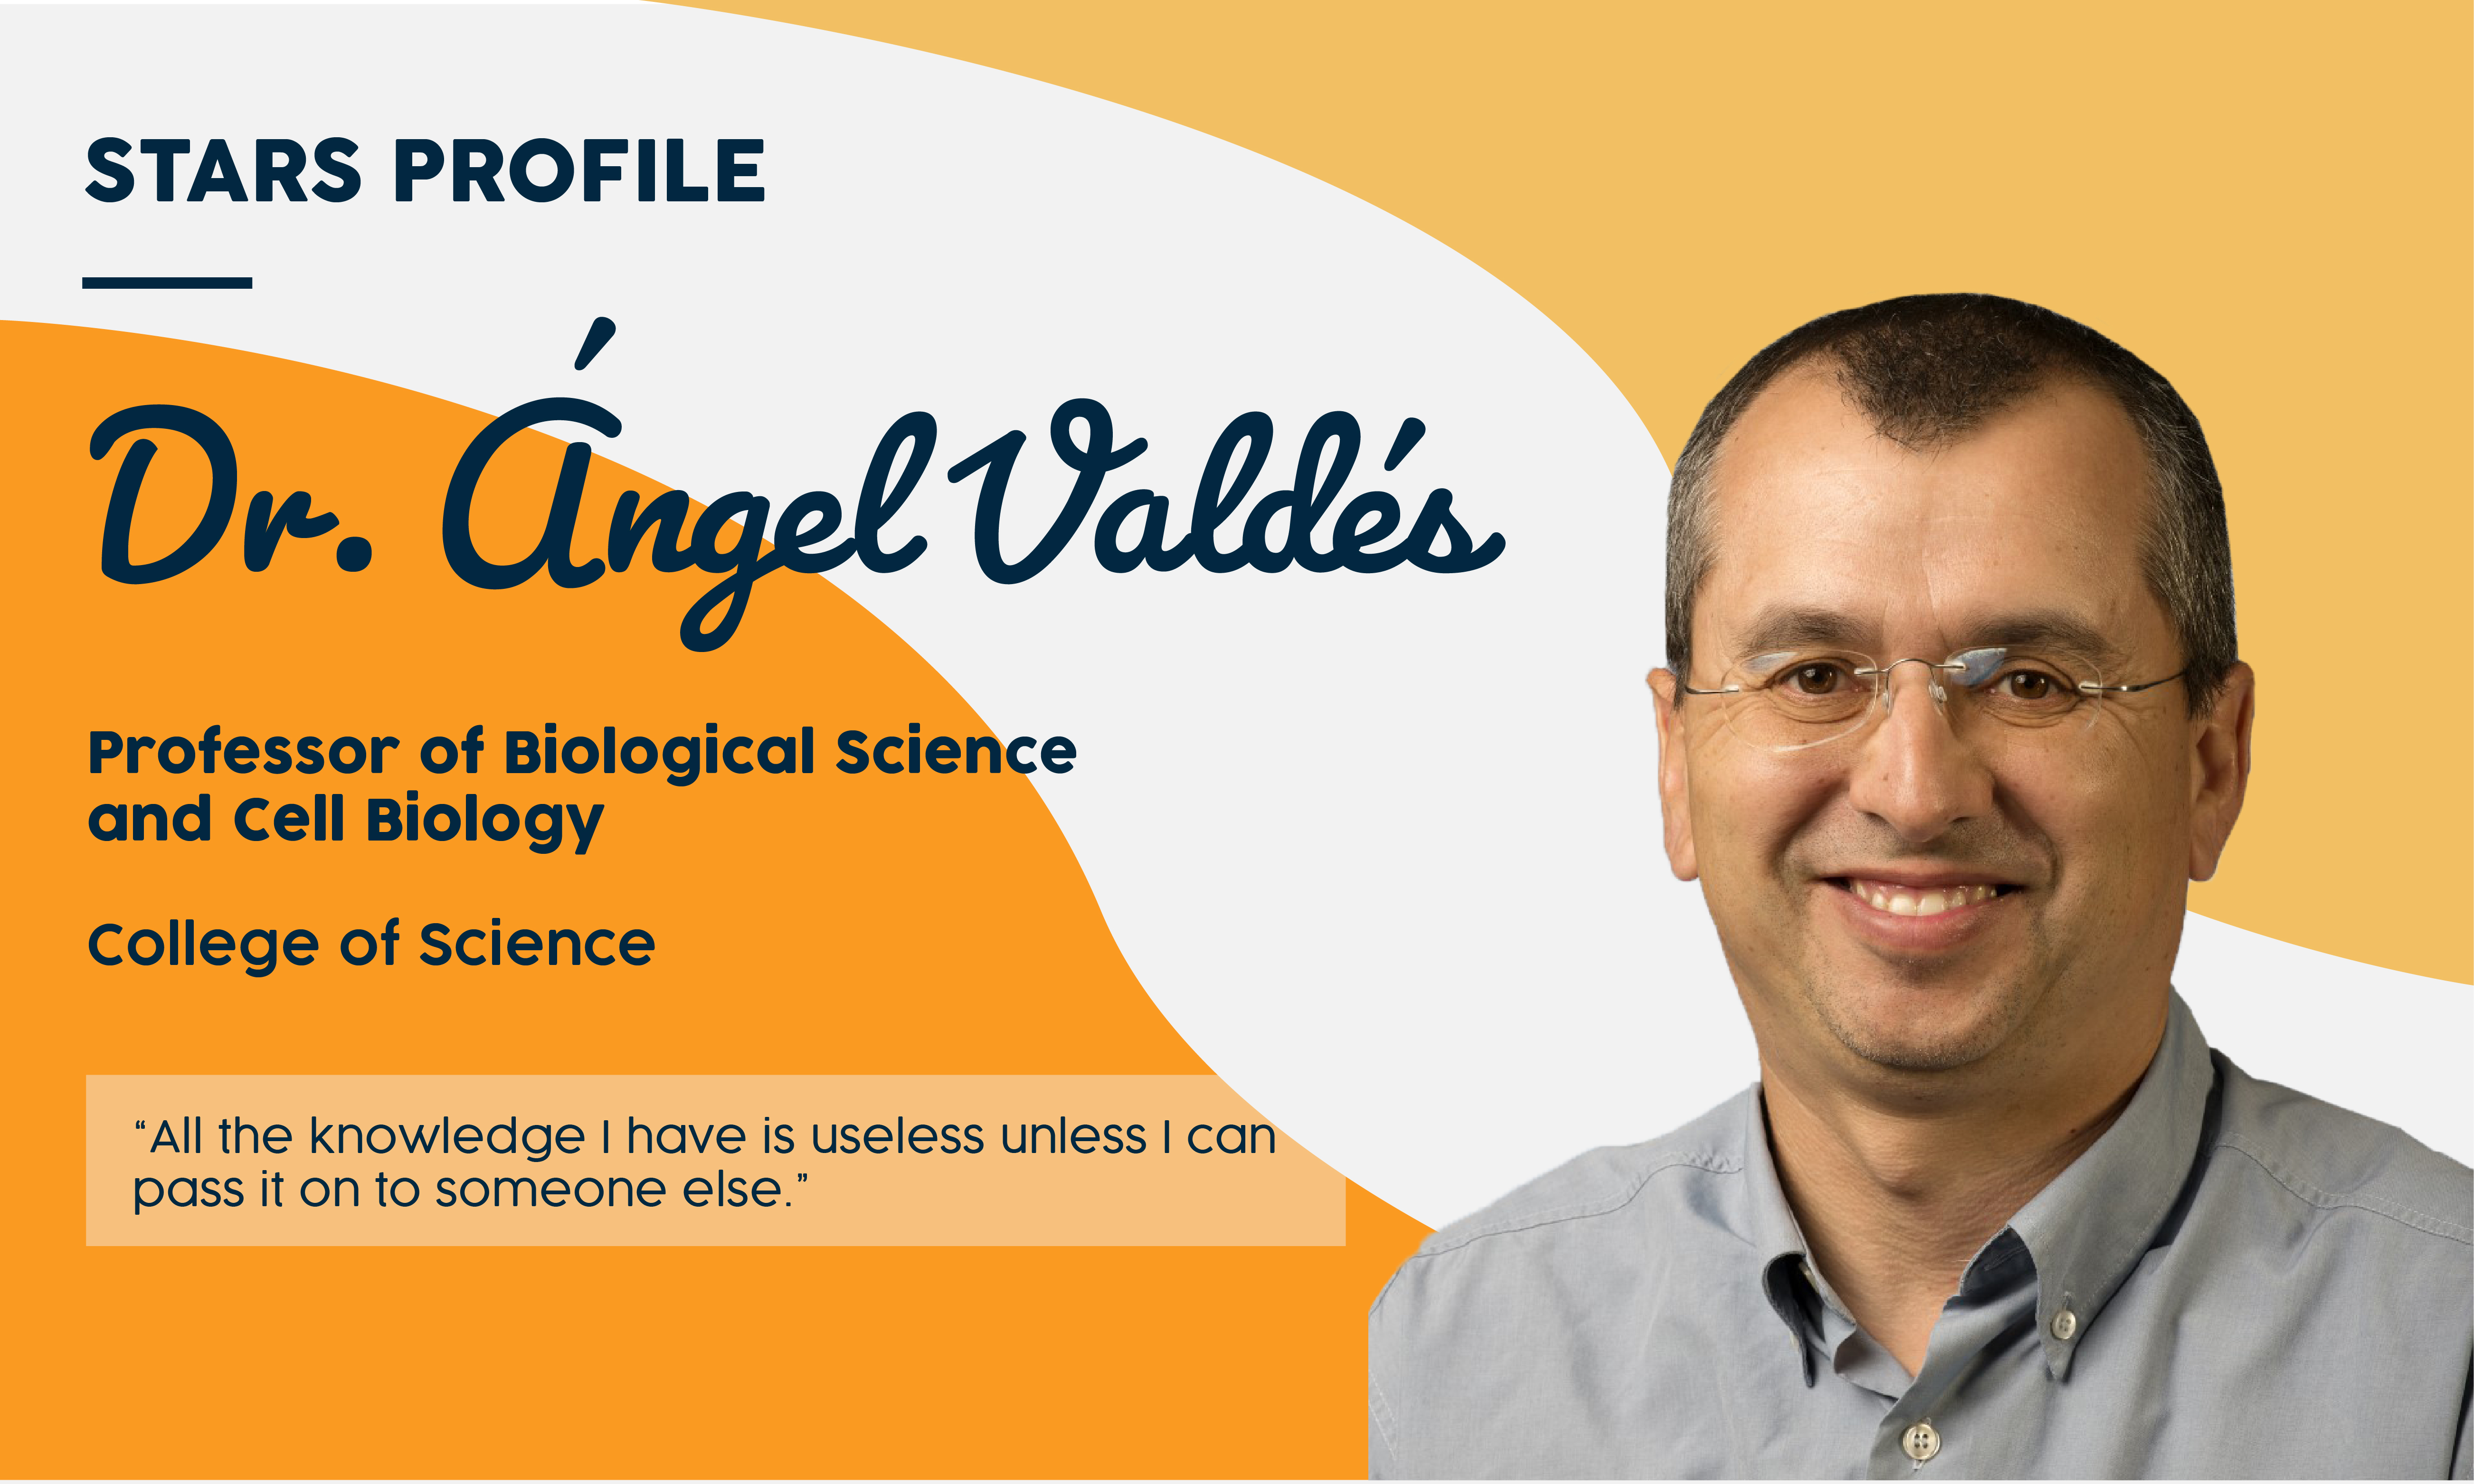 Angel Valdes, faculty in the college of science department